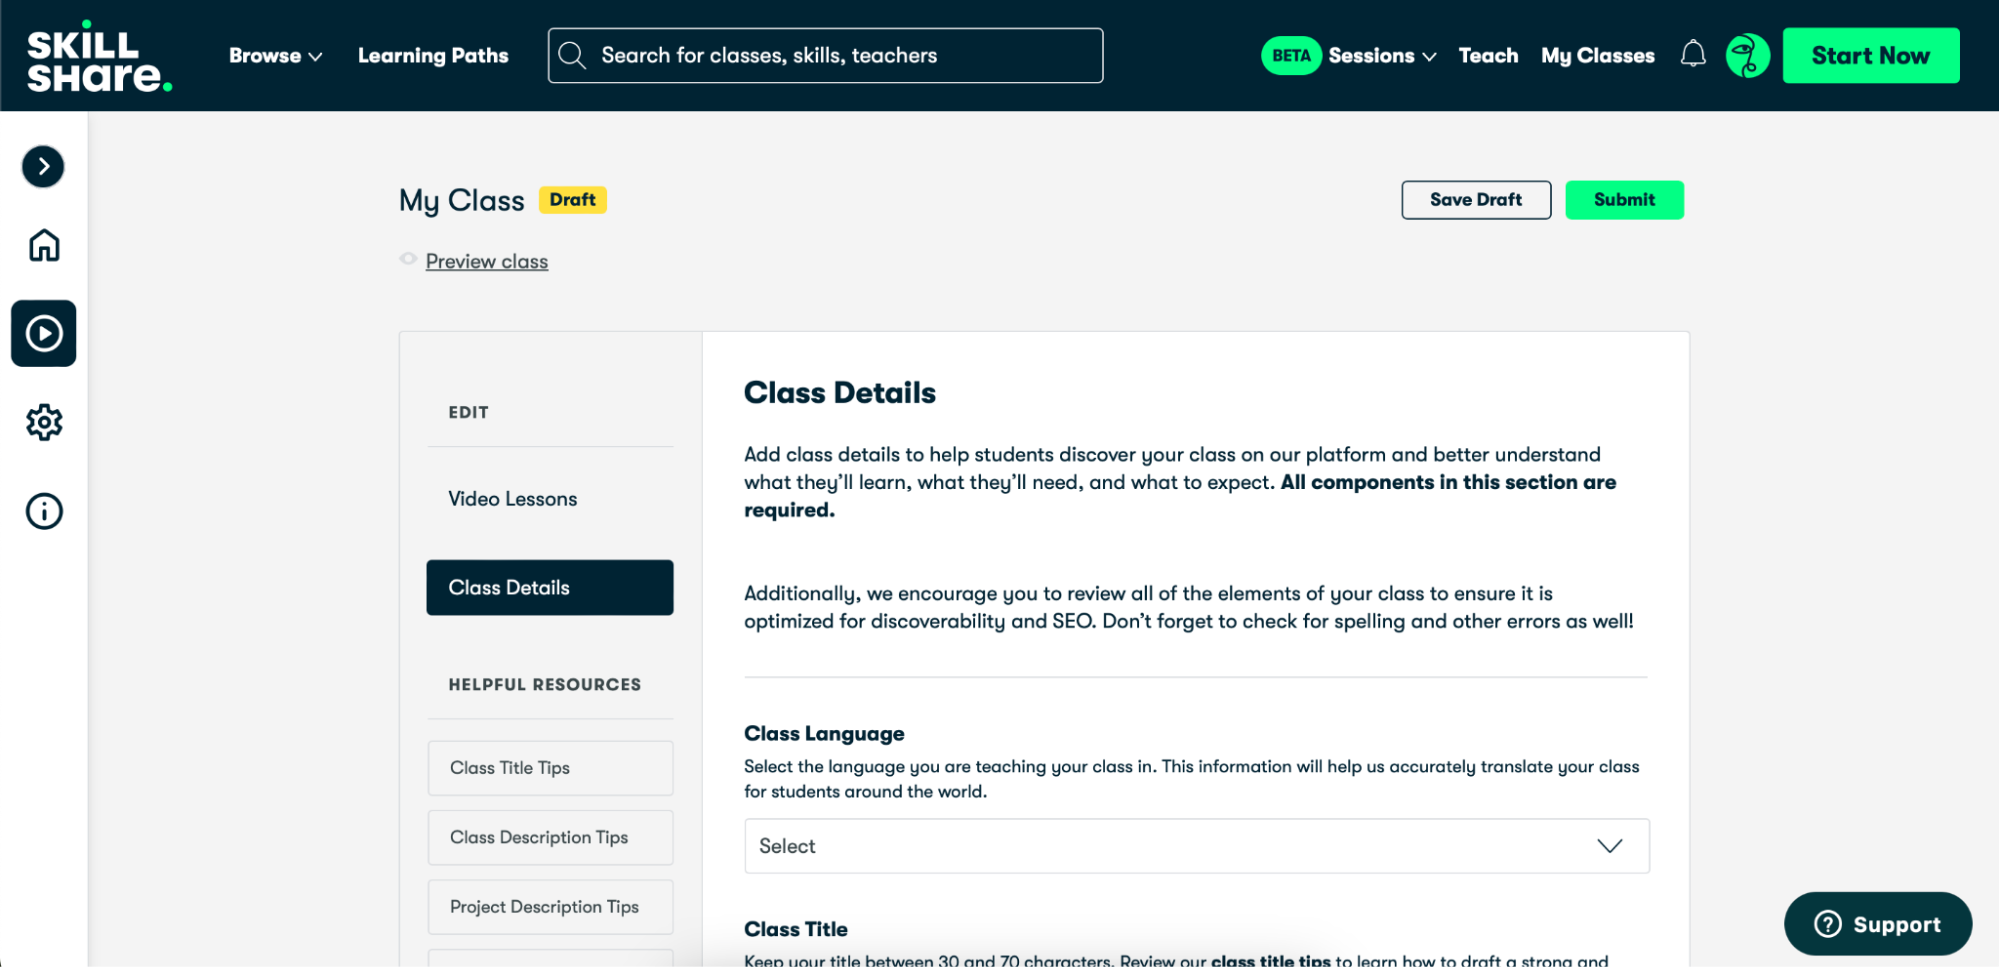 Class Central, a search engine to find the best MOOCs and online